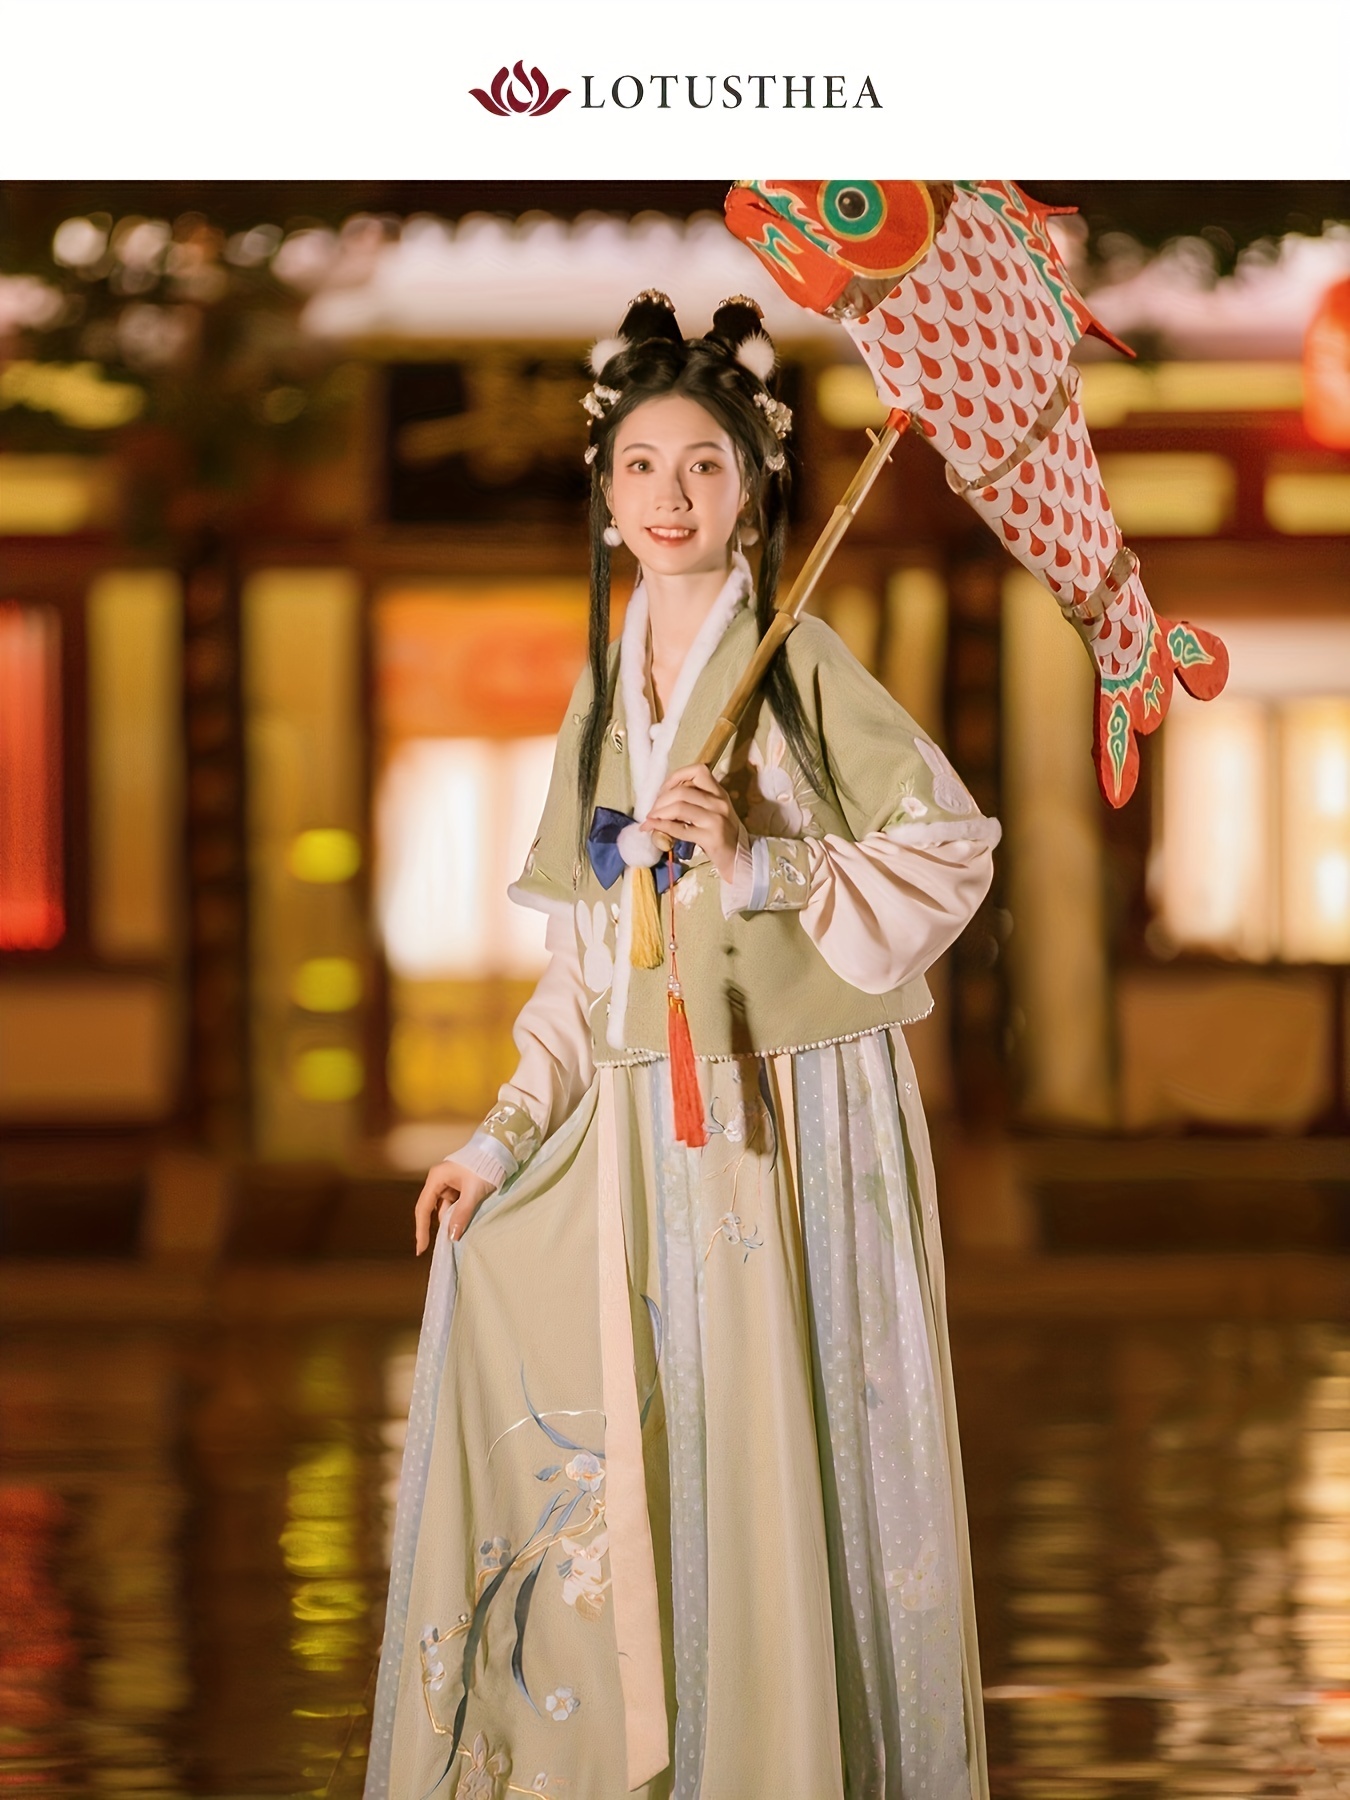 Clothes Female Costume Sets Traditional Chinese Clothing Tang Dynasty  Clothing